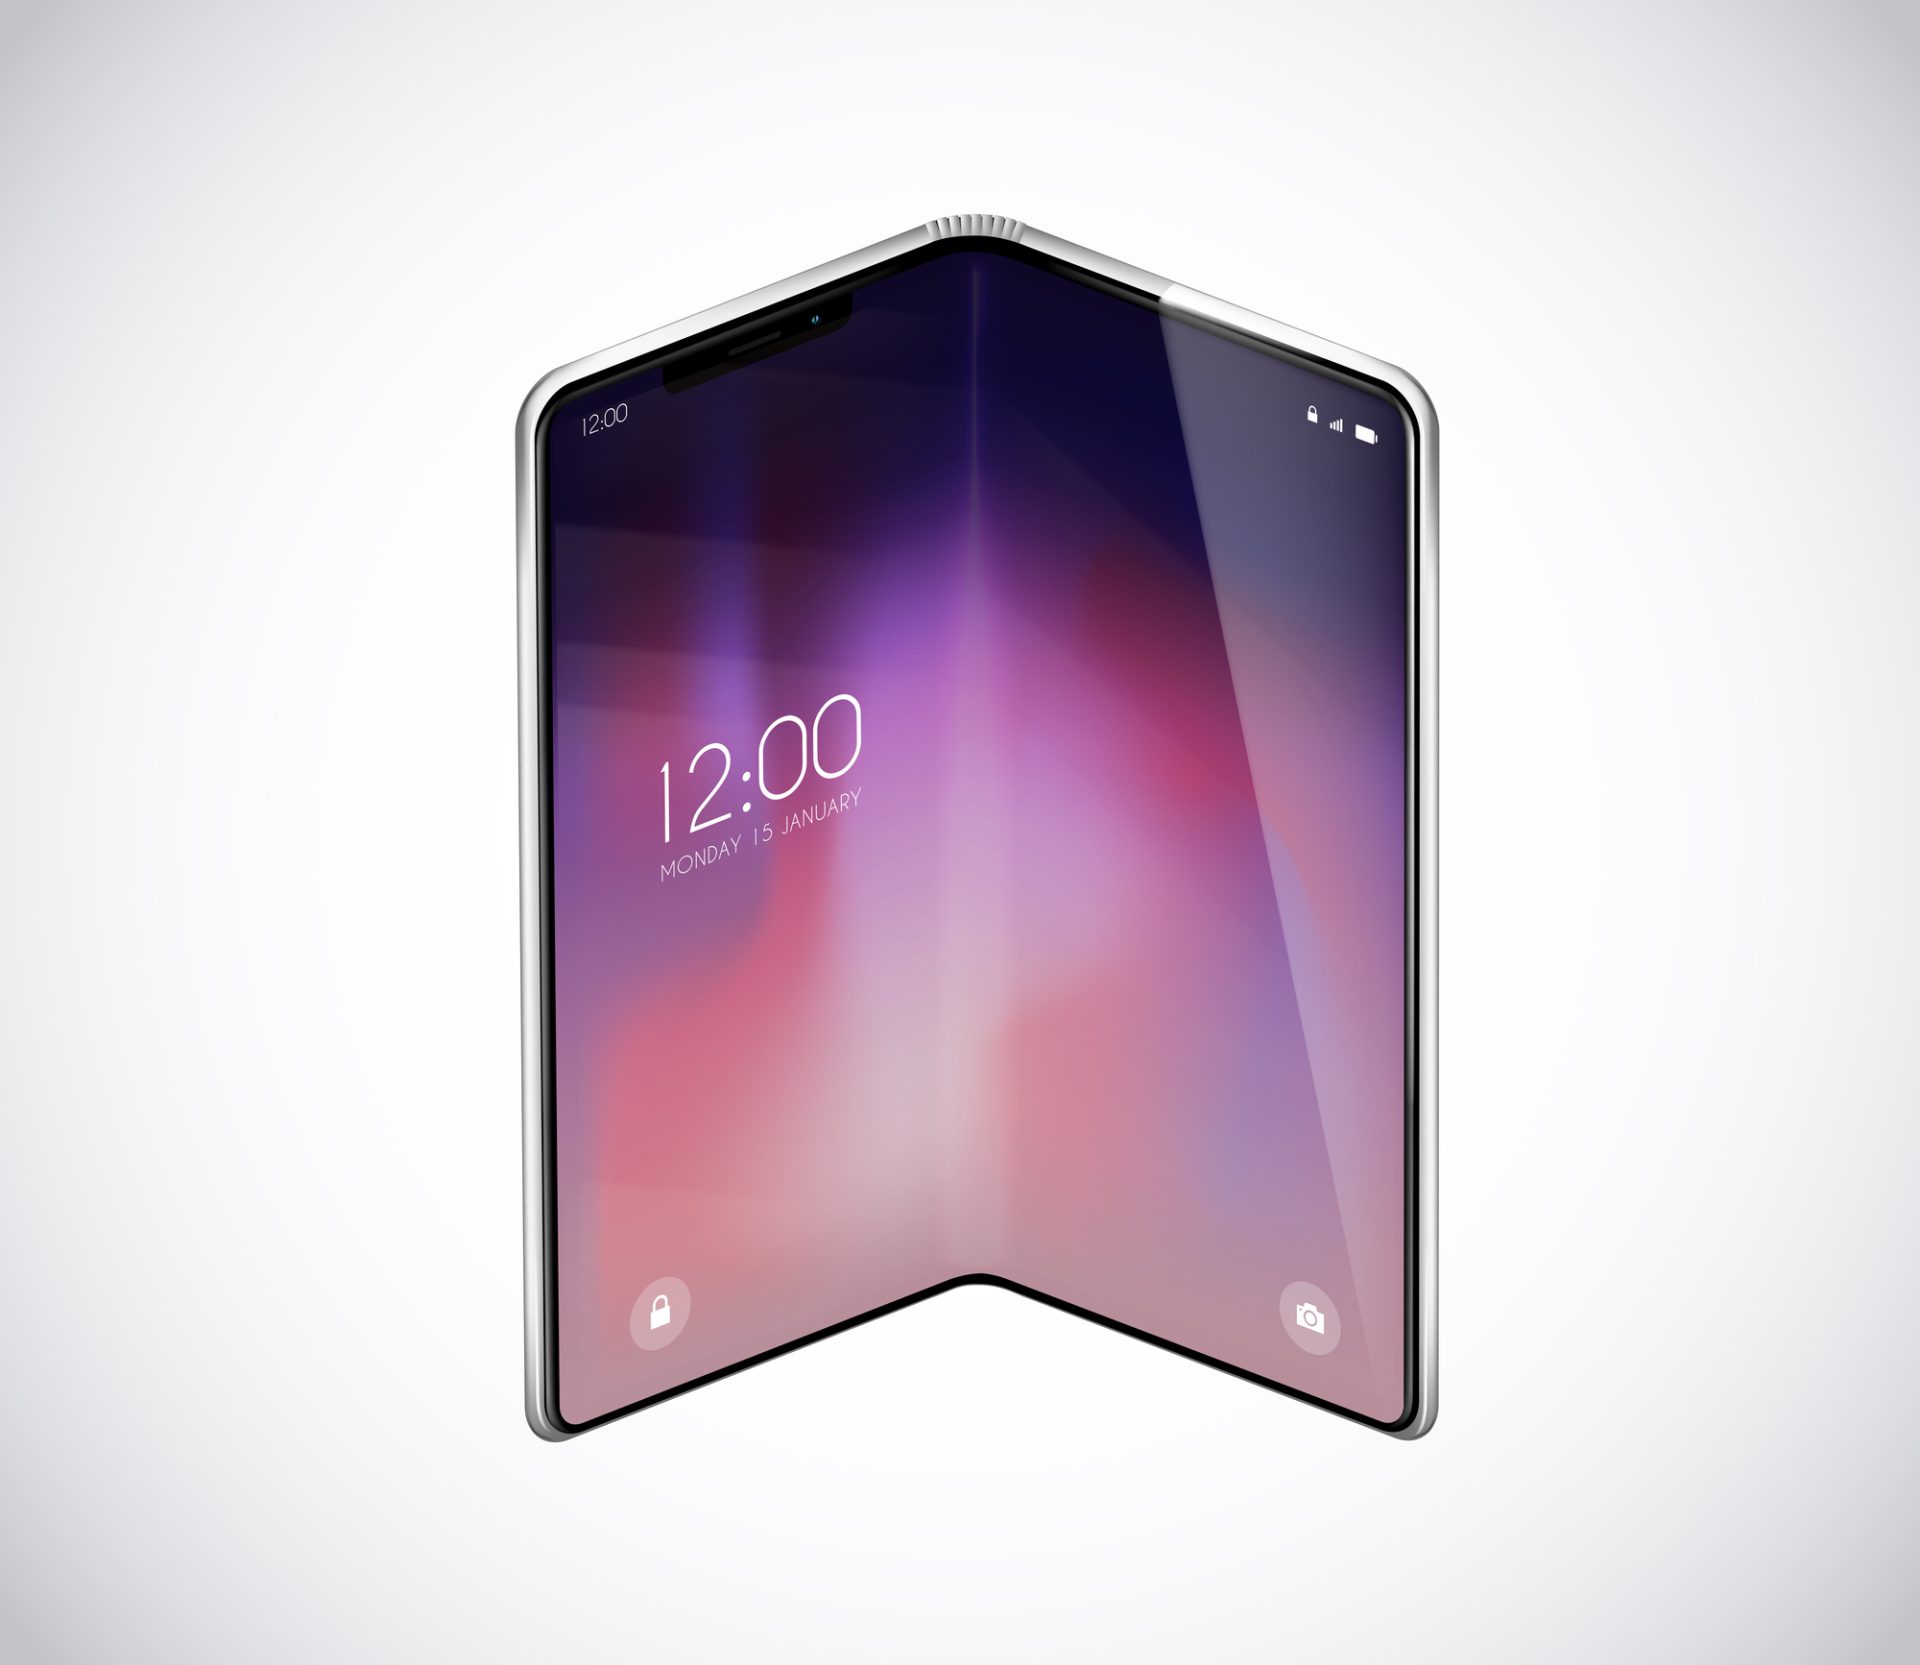 New foldable smartphone concept, prototype with advertisment background.